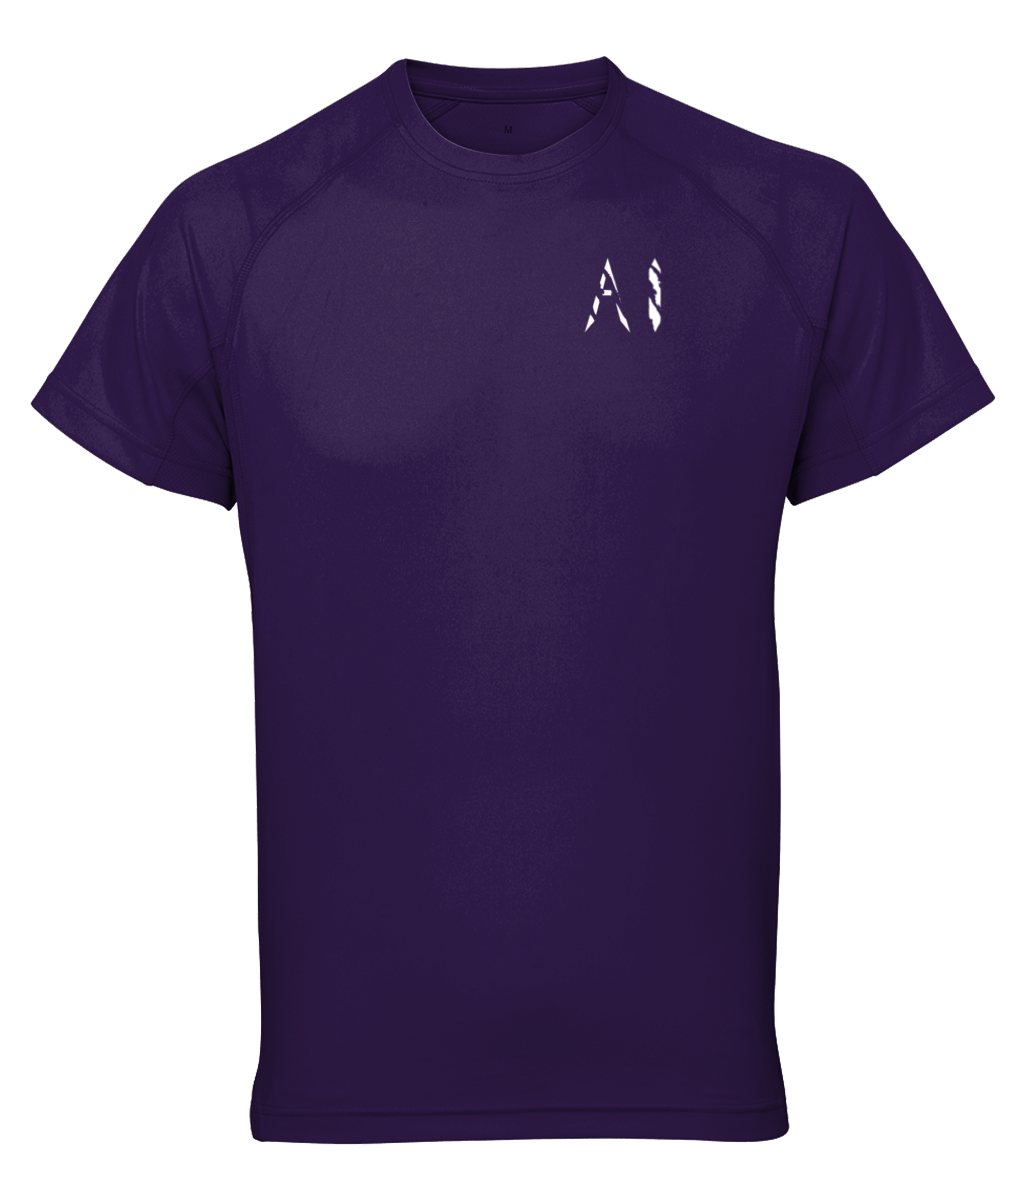 Womens purple Athletic Performance Top with White AI logo on left breast